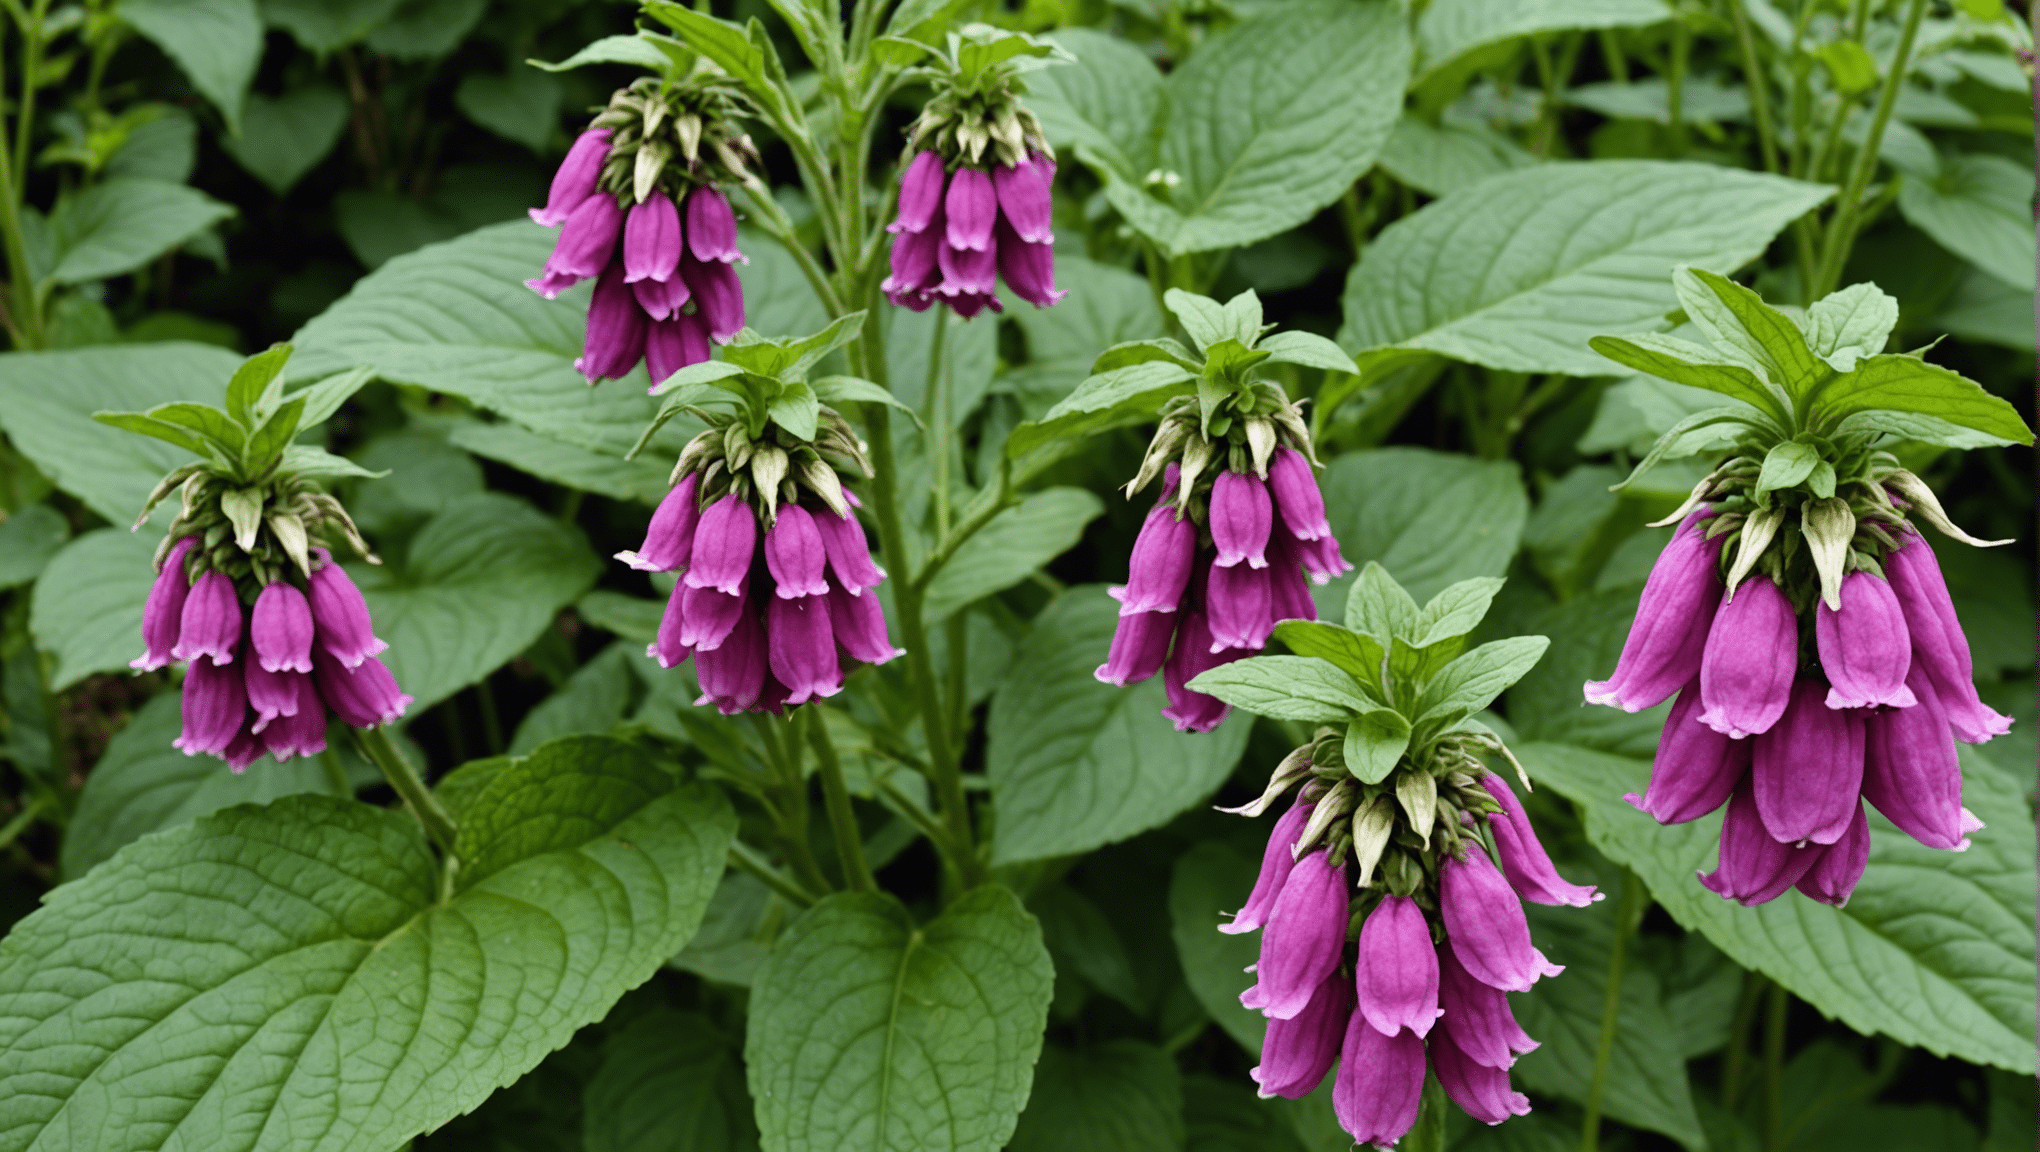 discover the benefits of planting comfrey seeds and how they can enhance your gardening experience. learn more about comfrey's unique properties and its potential impact on your garden ecosystem.